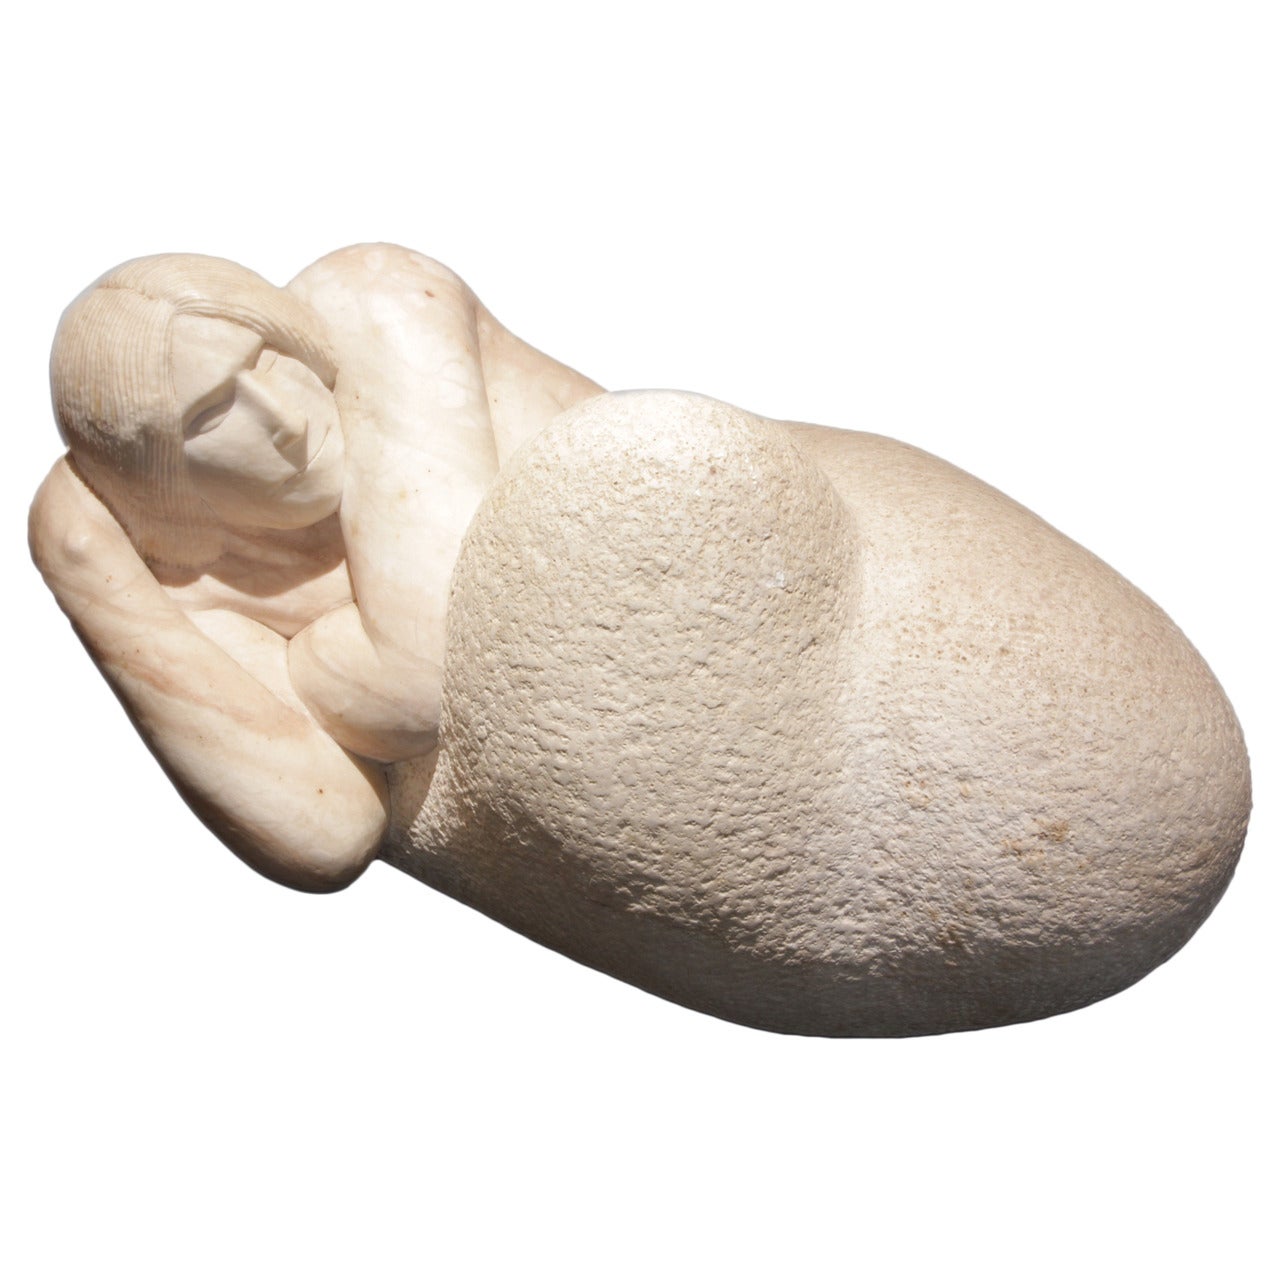 Bob Haozous, Native Alabaster Sculpture from the Jemez Mountains, circa 1980 For Sale